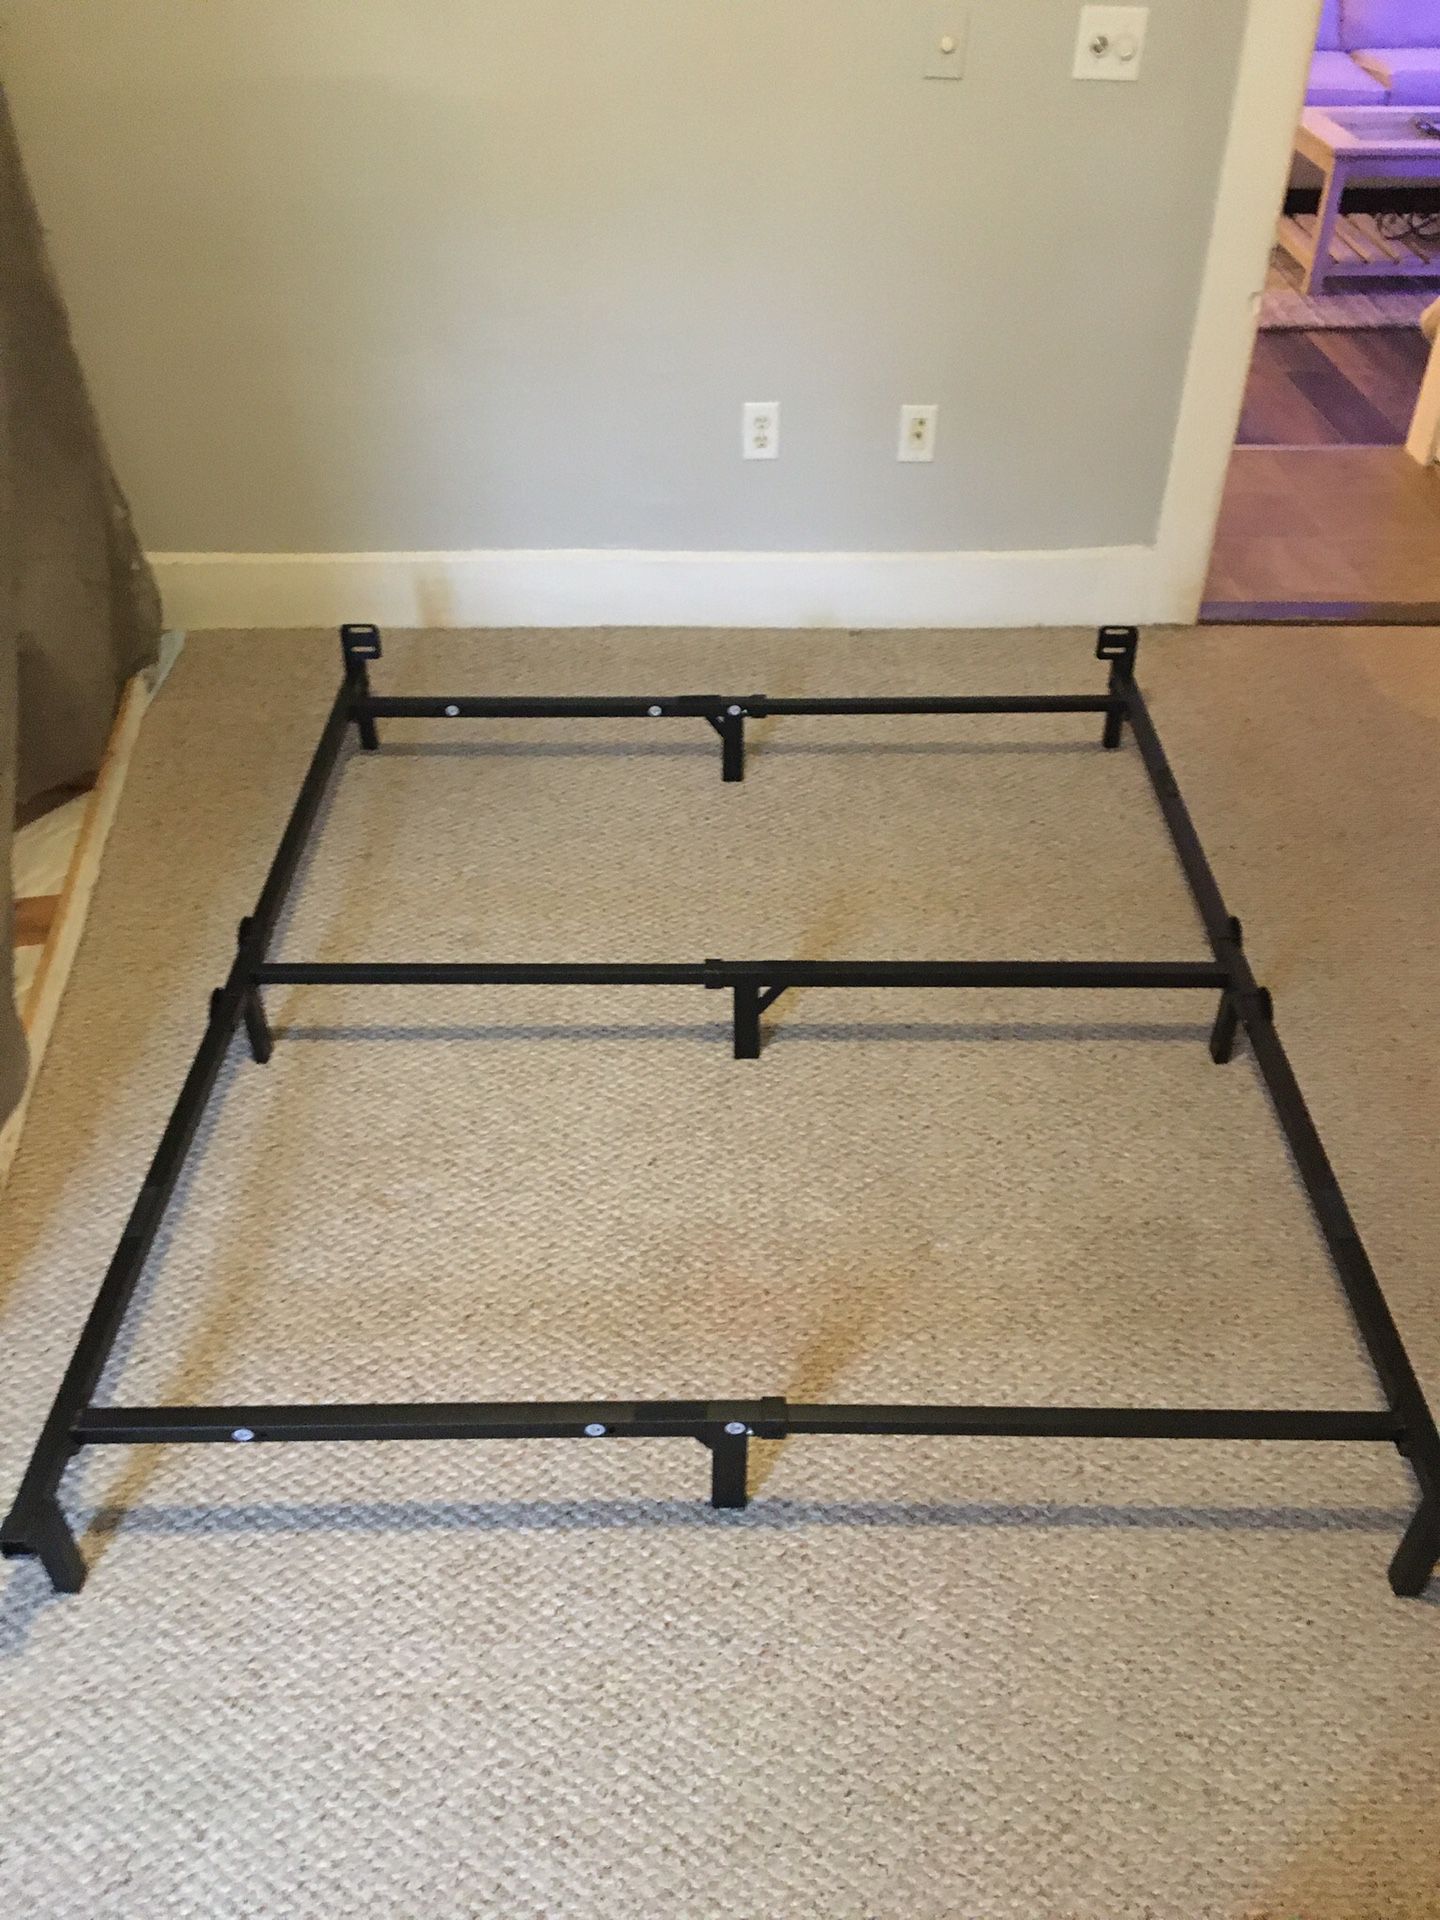 Any size new bed frame. Used for one month.